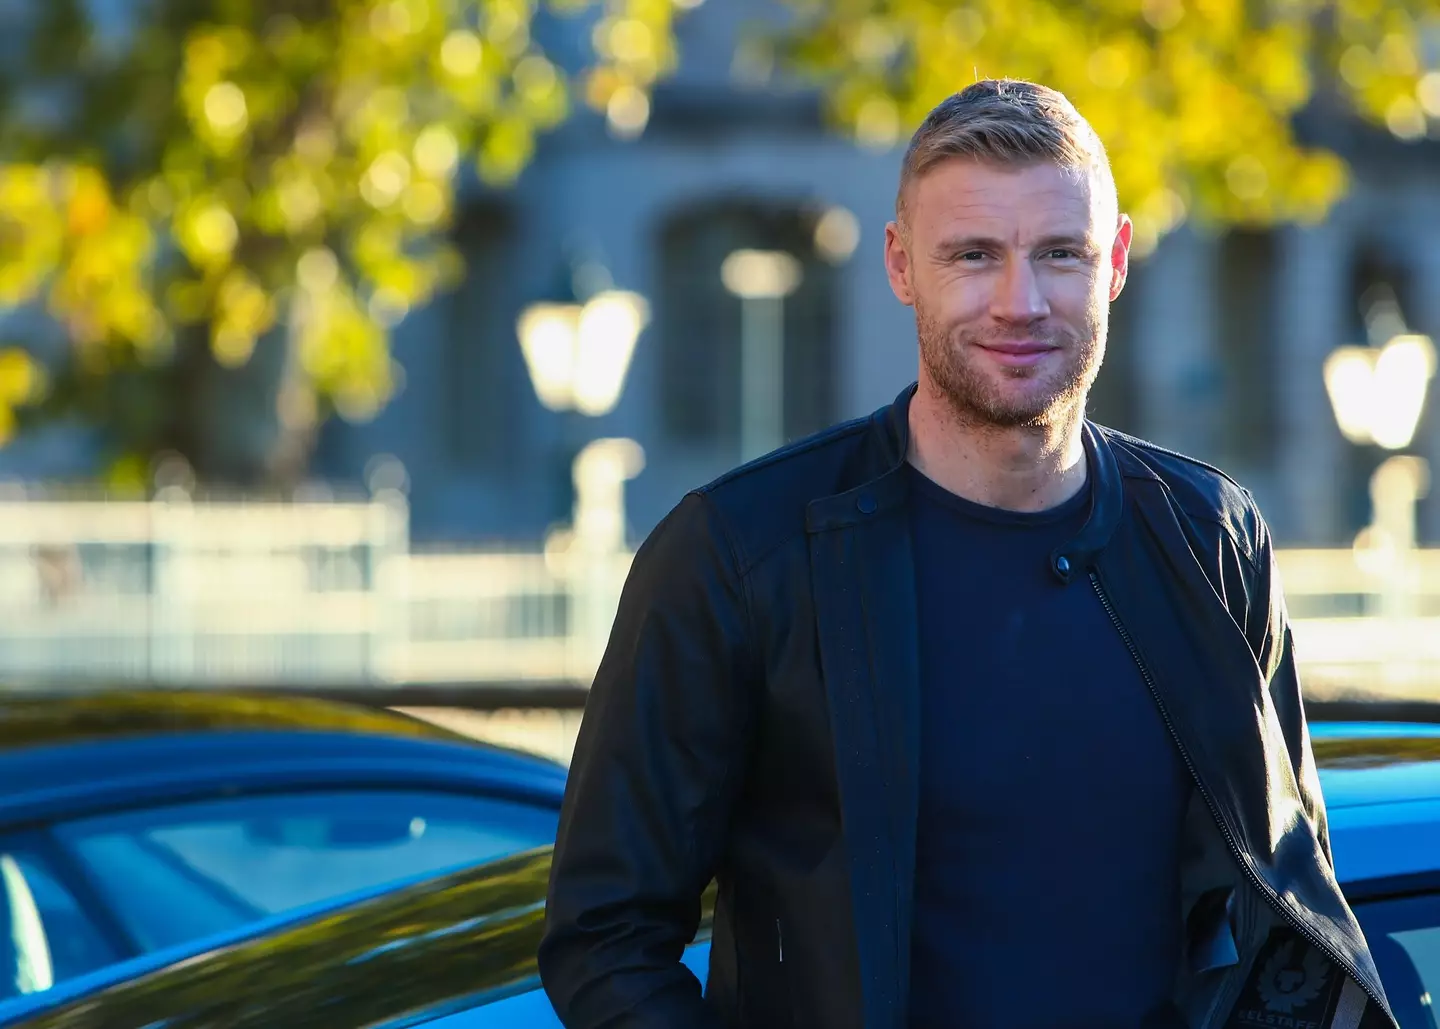 Flintoff was rushed to hospital.